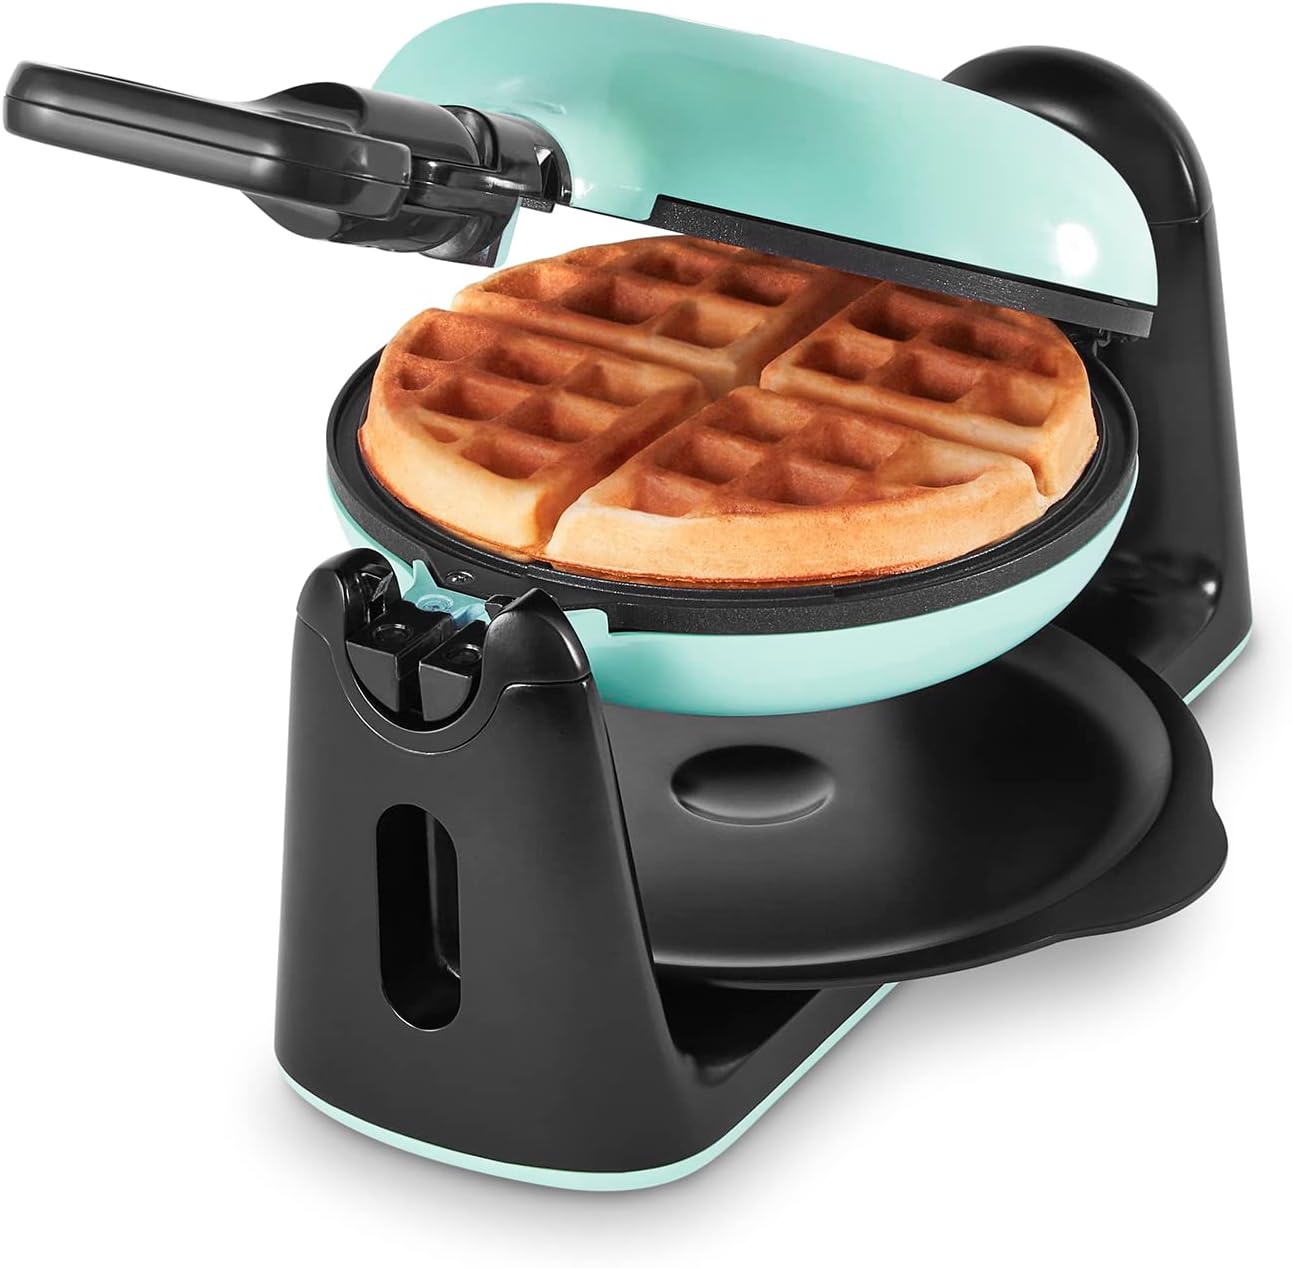 Works great. Waffles were wonderful. They look cheaply made but theyve not. Very well made. Easy to use. Easy to clean. Works fast.